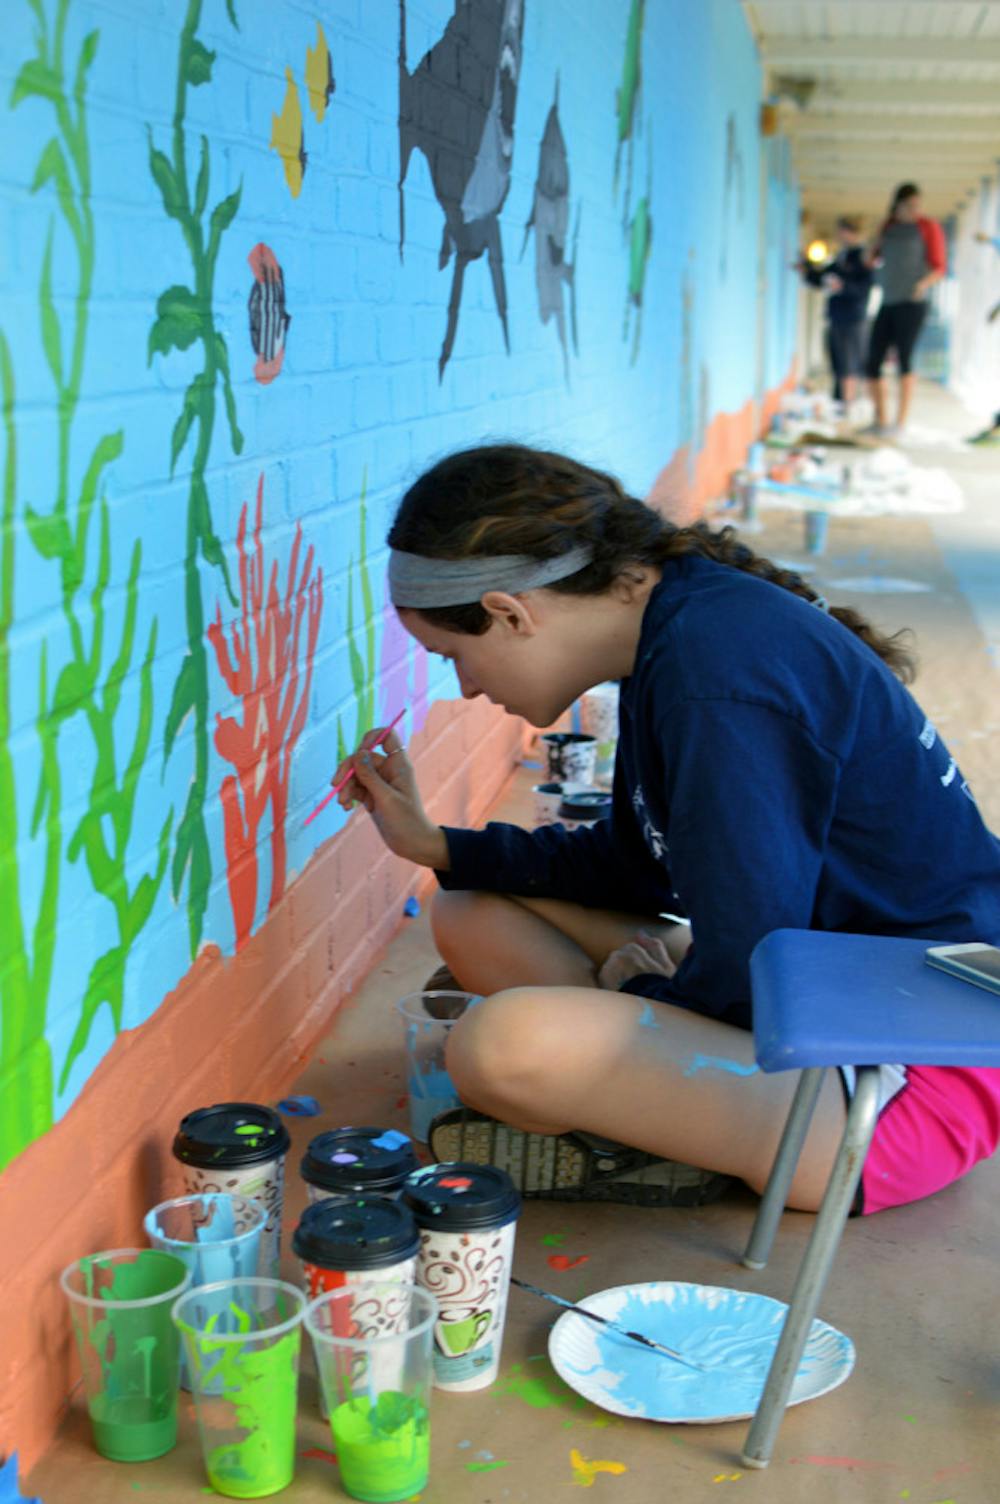 <p class="p1">Katie Weiser, a 19-year-old UF mechanical engineering sophomore, puts the finishing touches on a mural at the Sidney Lanier Center on Sunday. </p>